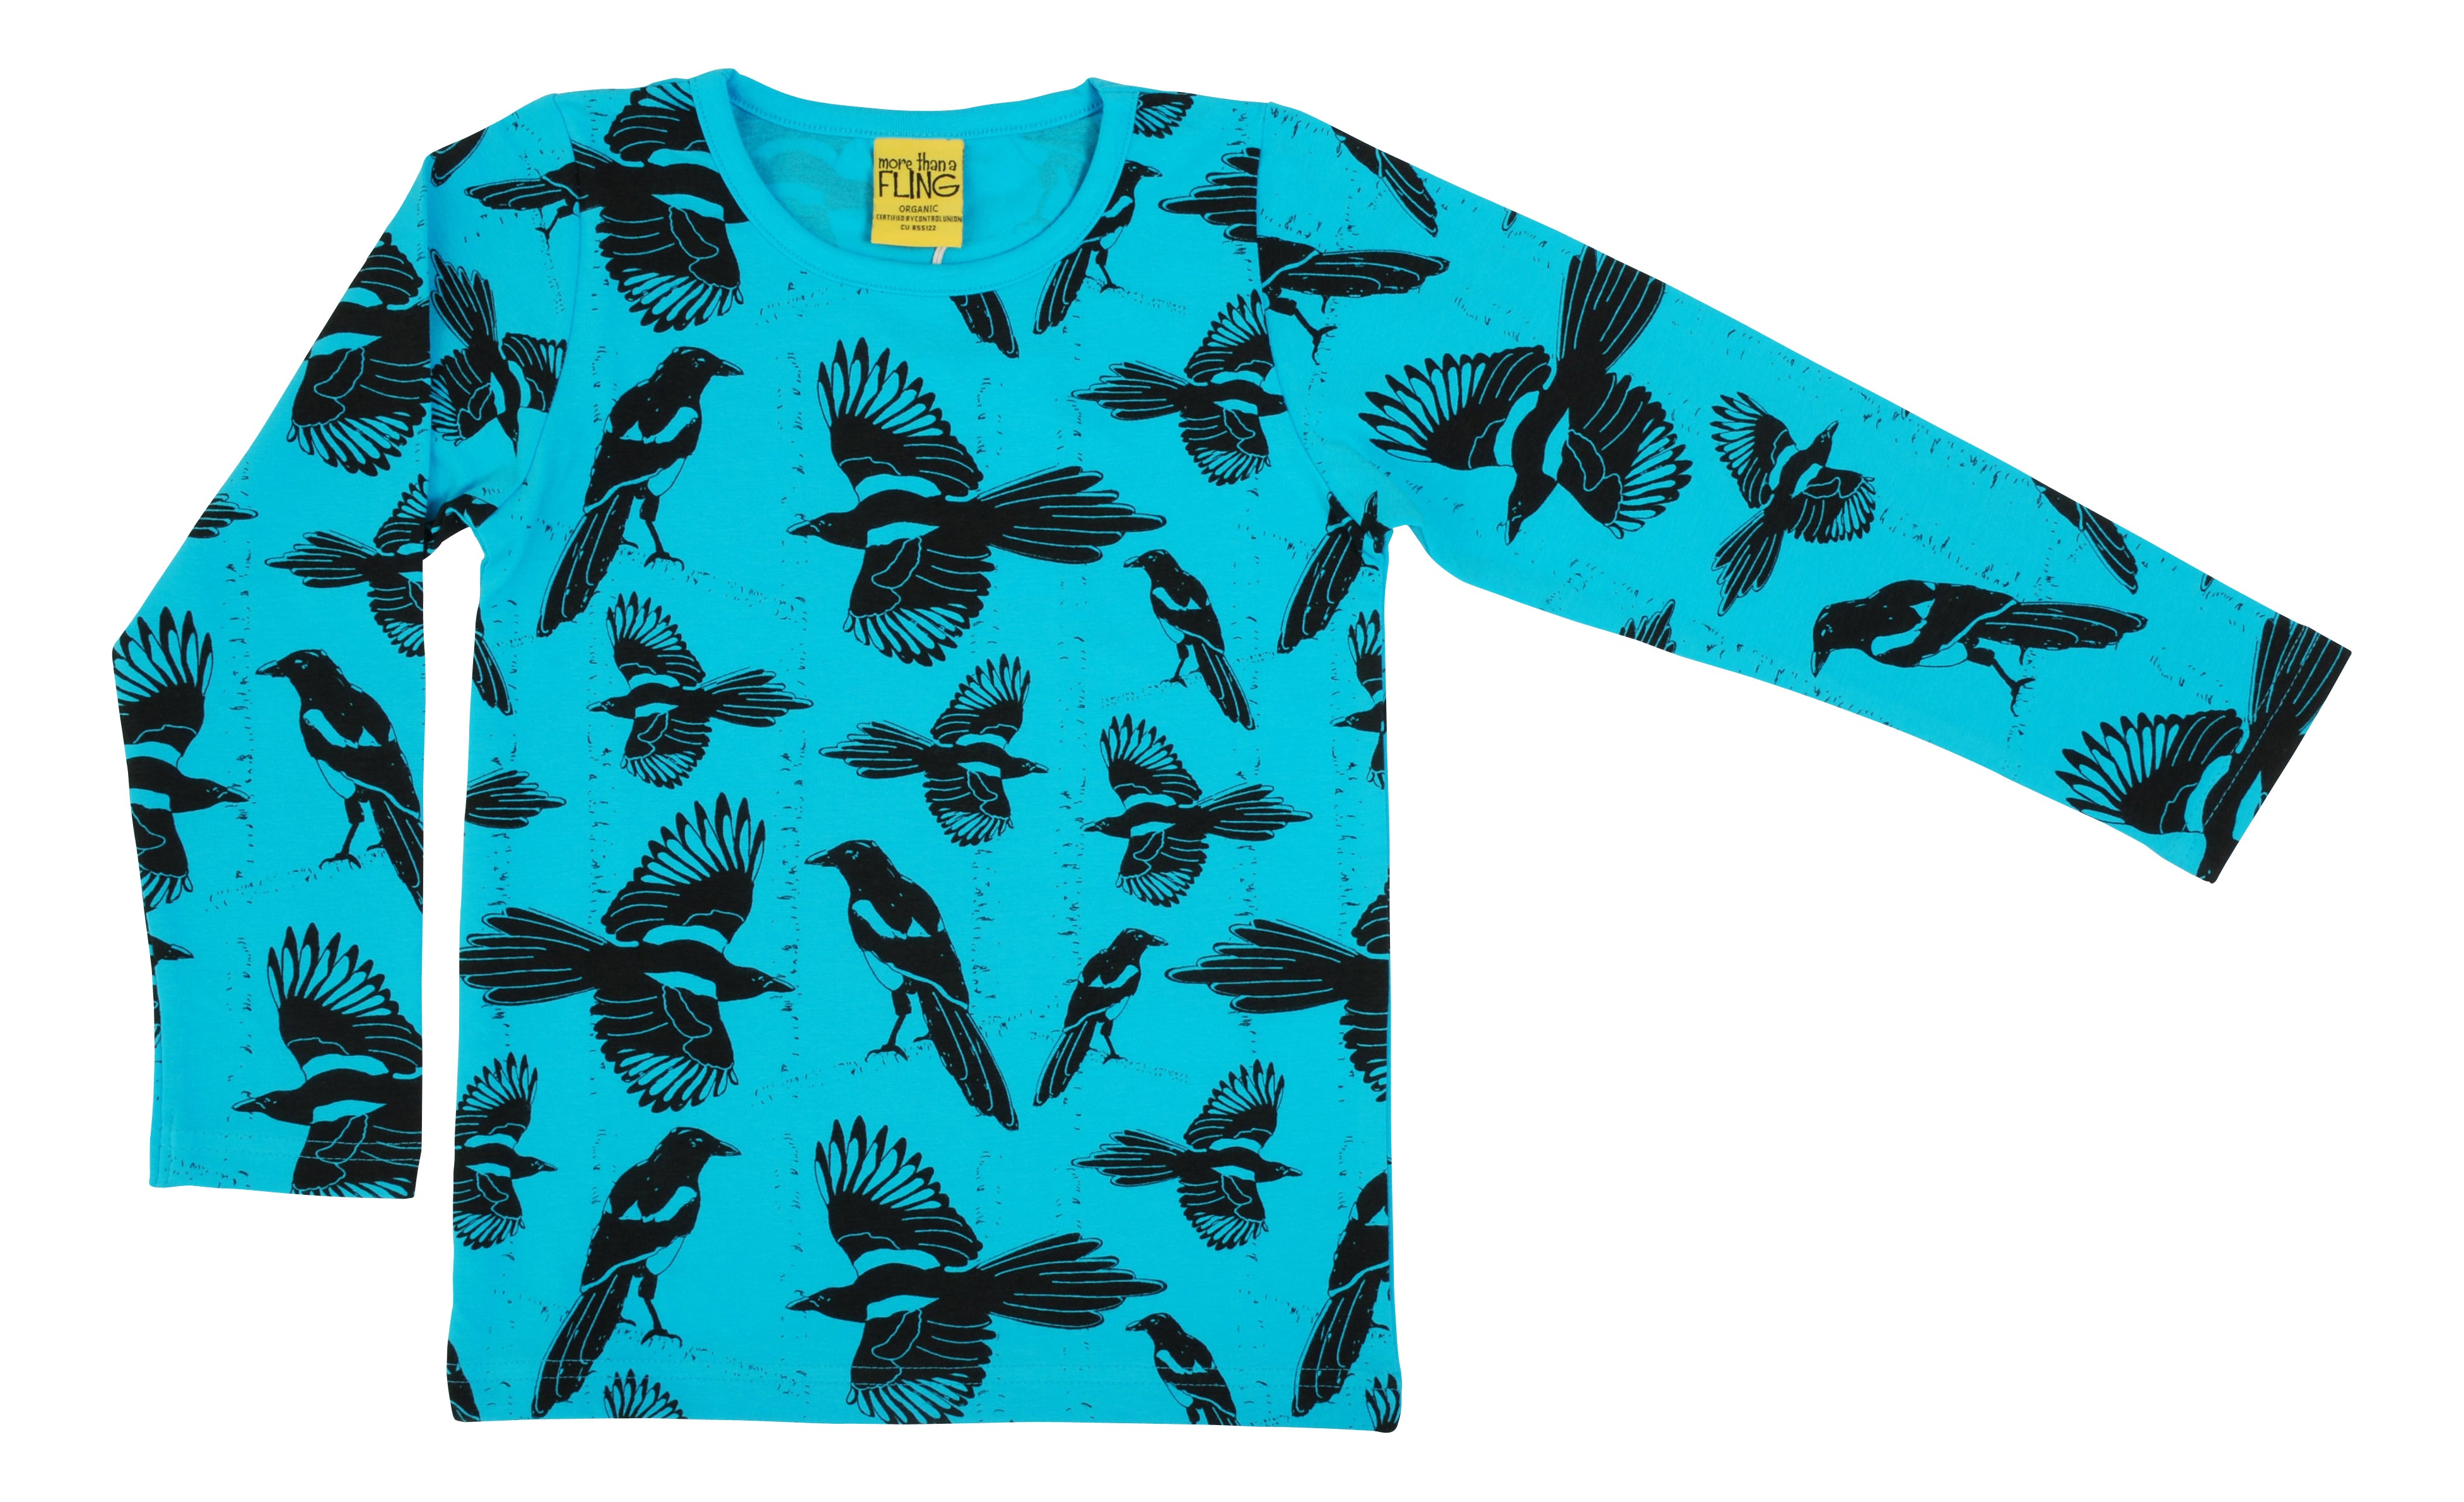 More Than A Fling - LS Tee - Pica Pica - Blue Atoll